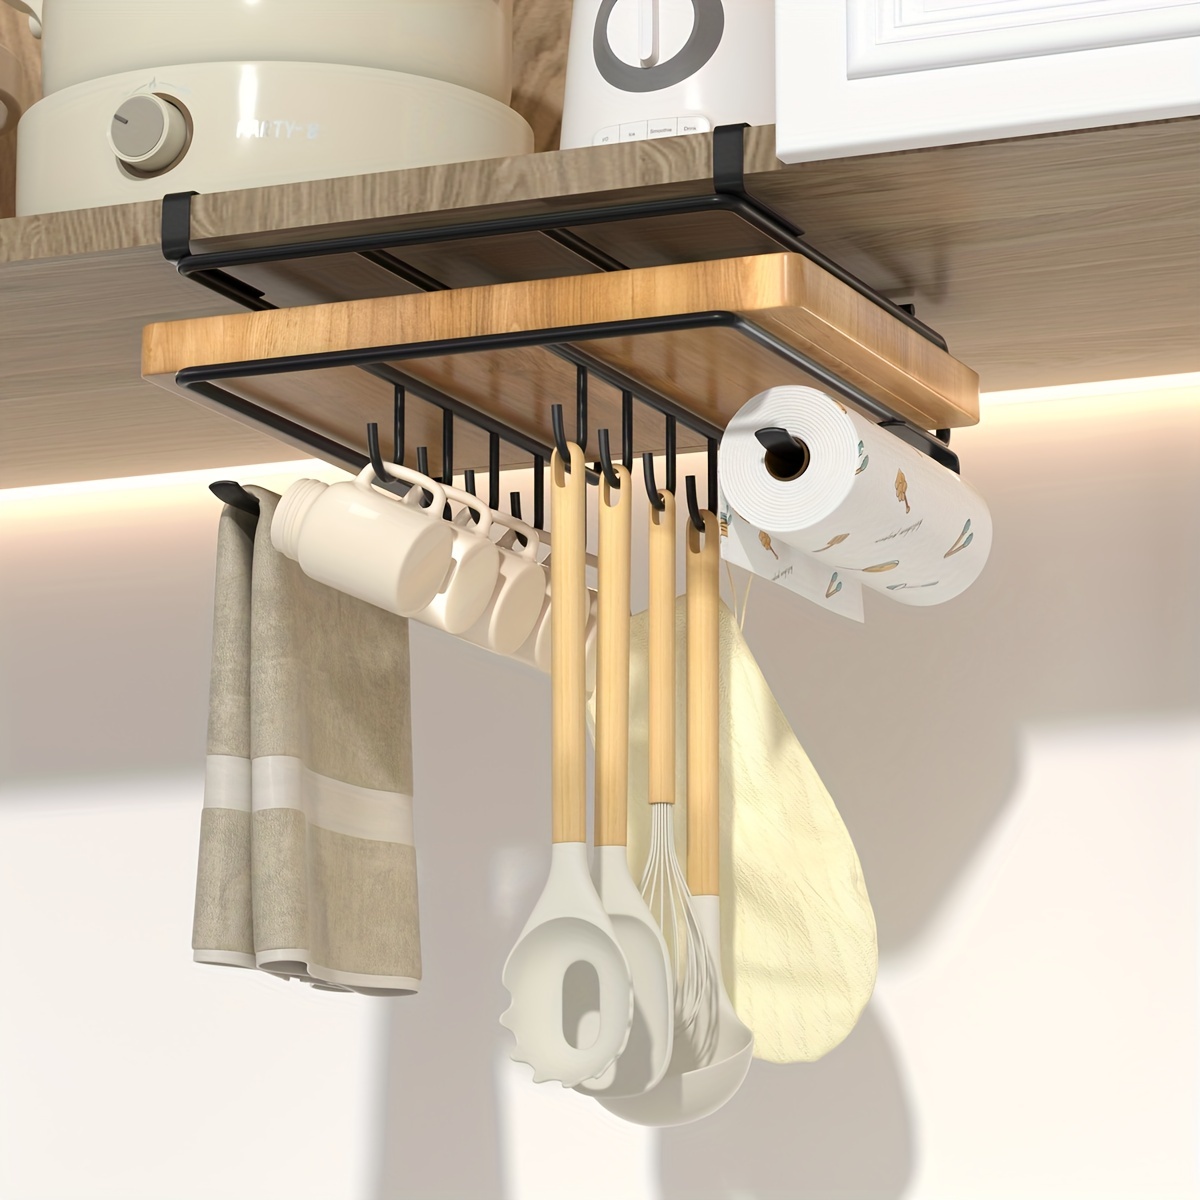 Microwave Food Cover Holder Space-saving Kitchen Hanger Fits Most